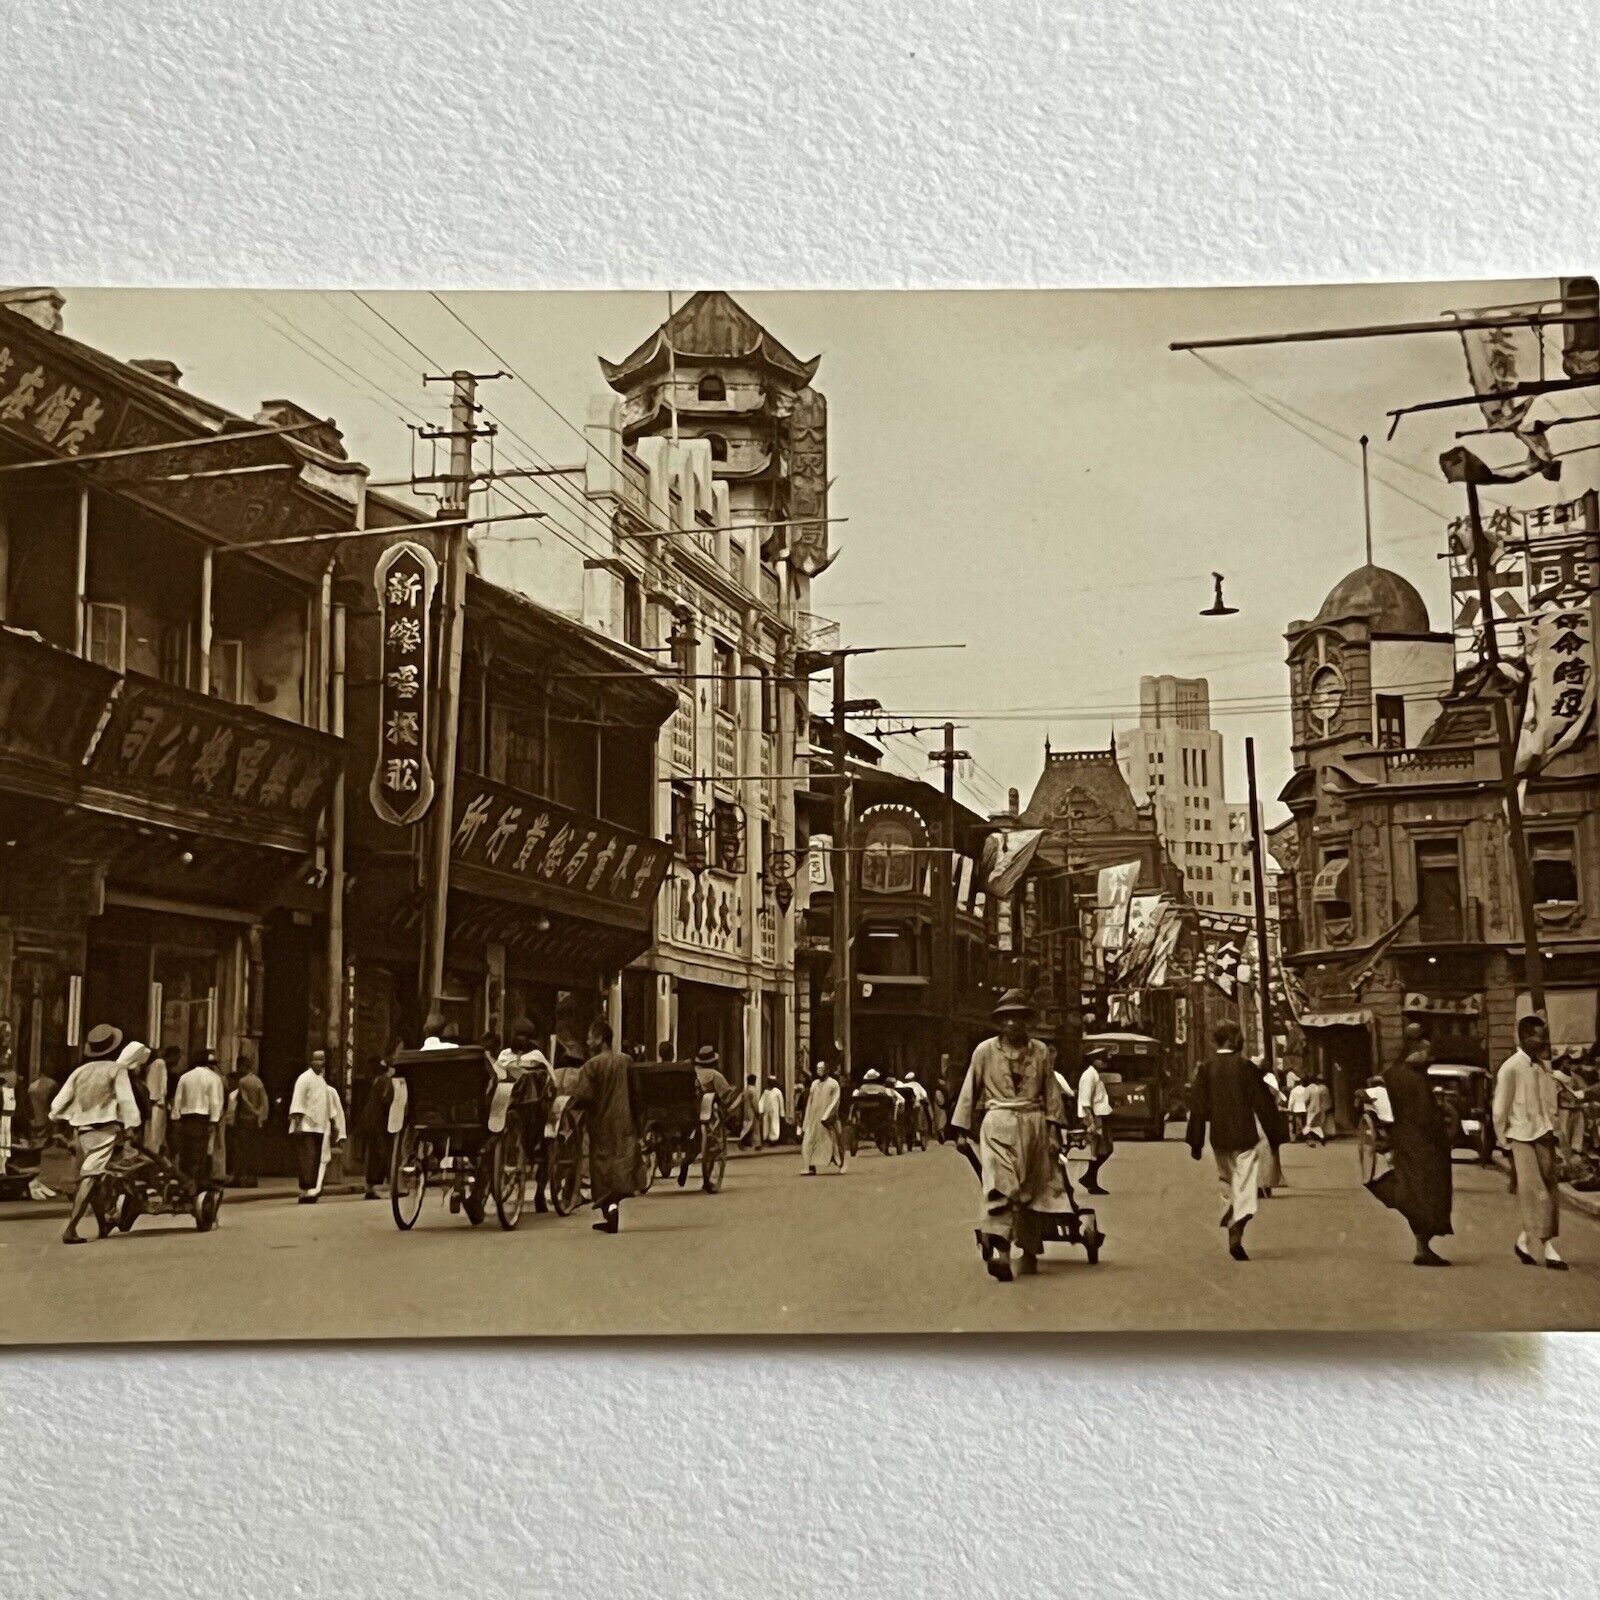 Vintage Snapshot Photograph Shanghai China Everyday Life Buildings Street View